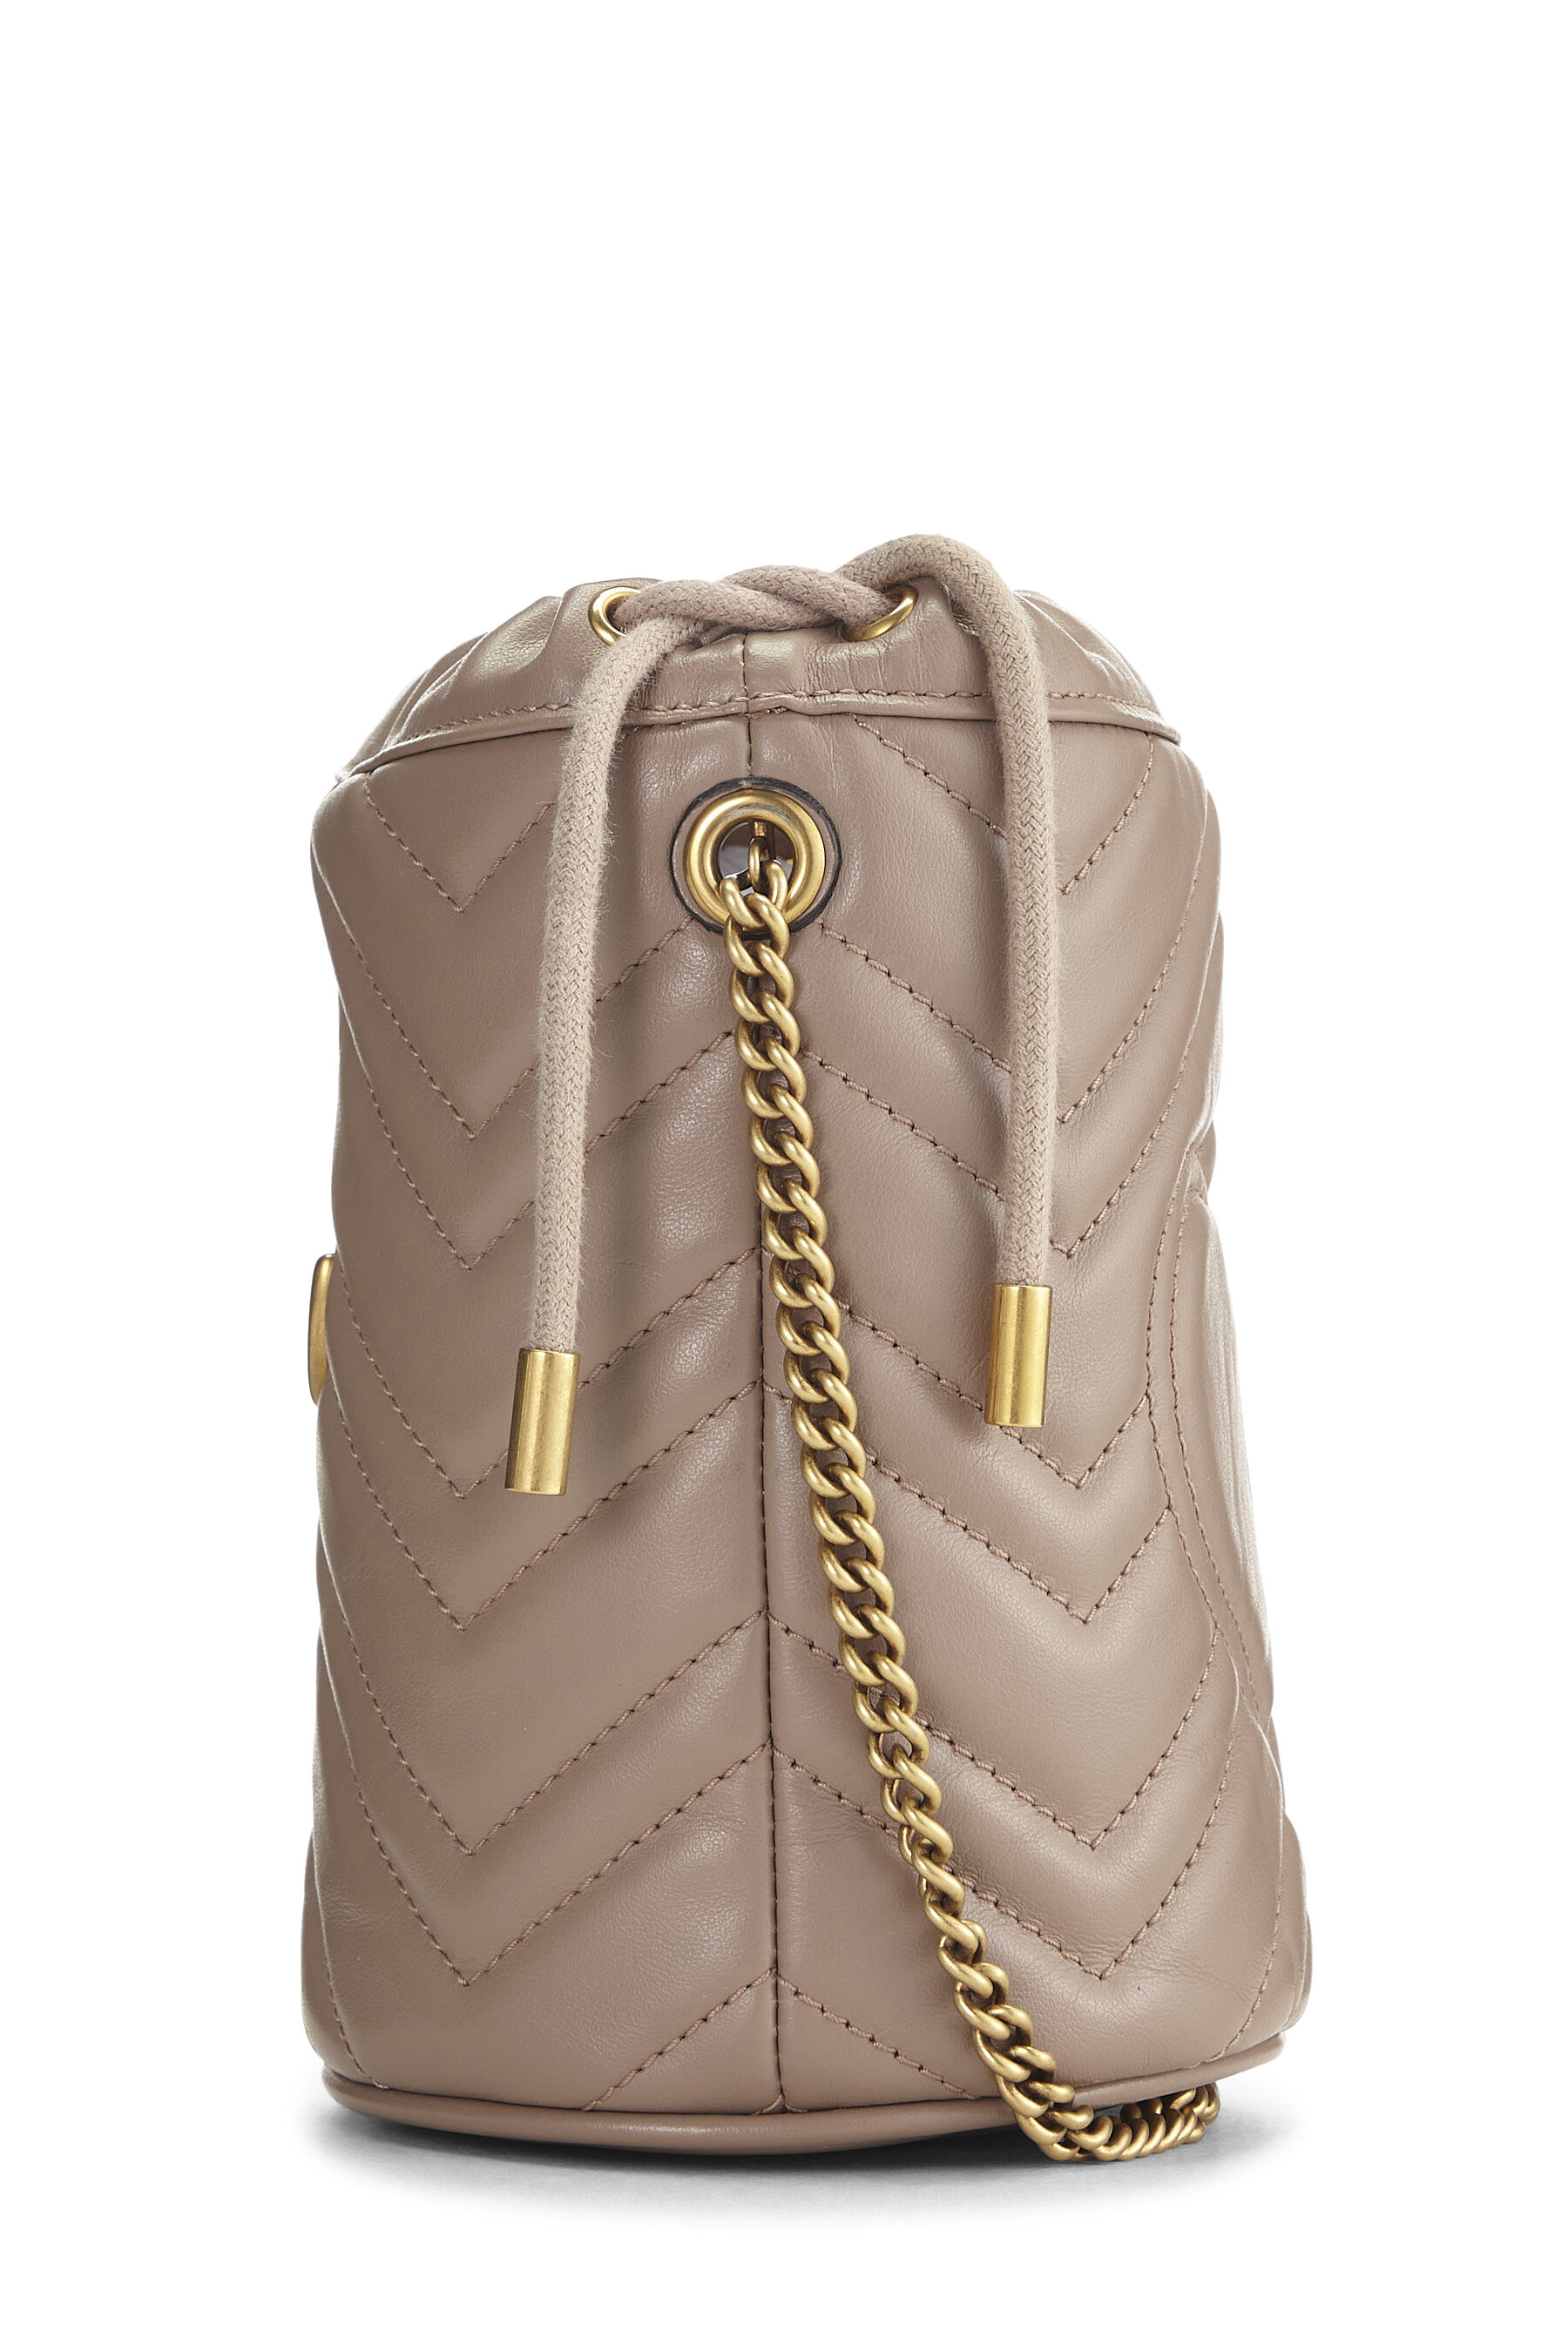 Beige Leather 'GG' Marmont Chain Bucket Bag Small